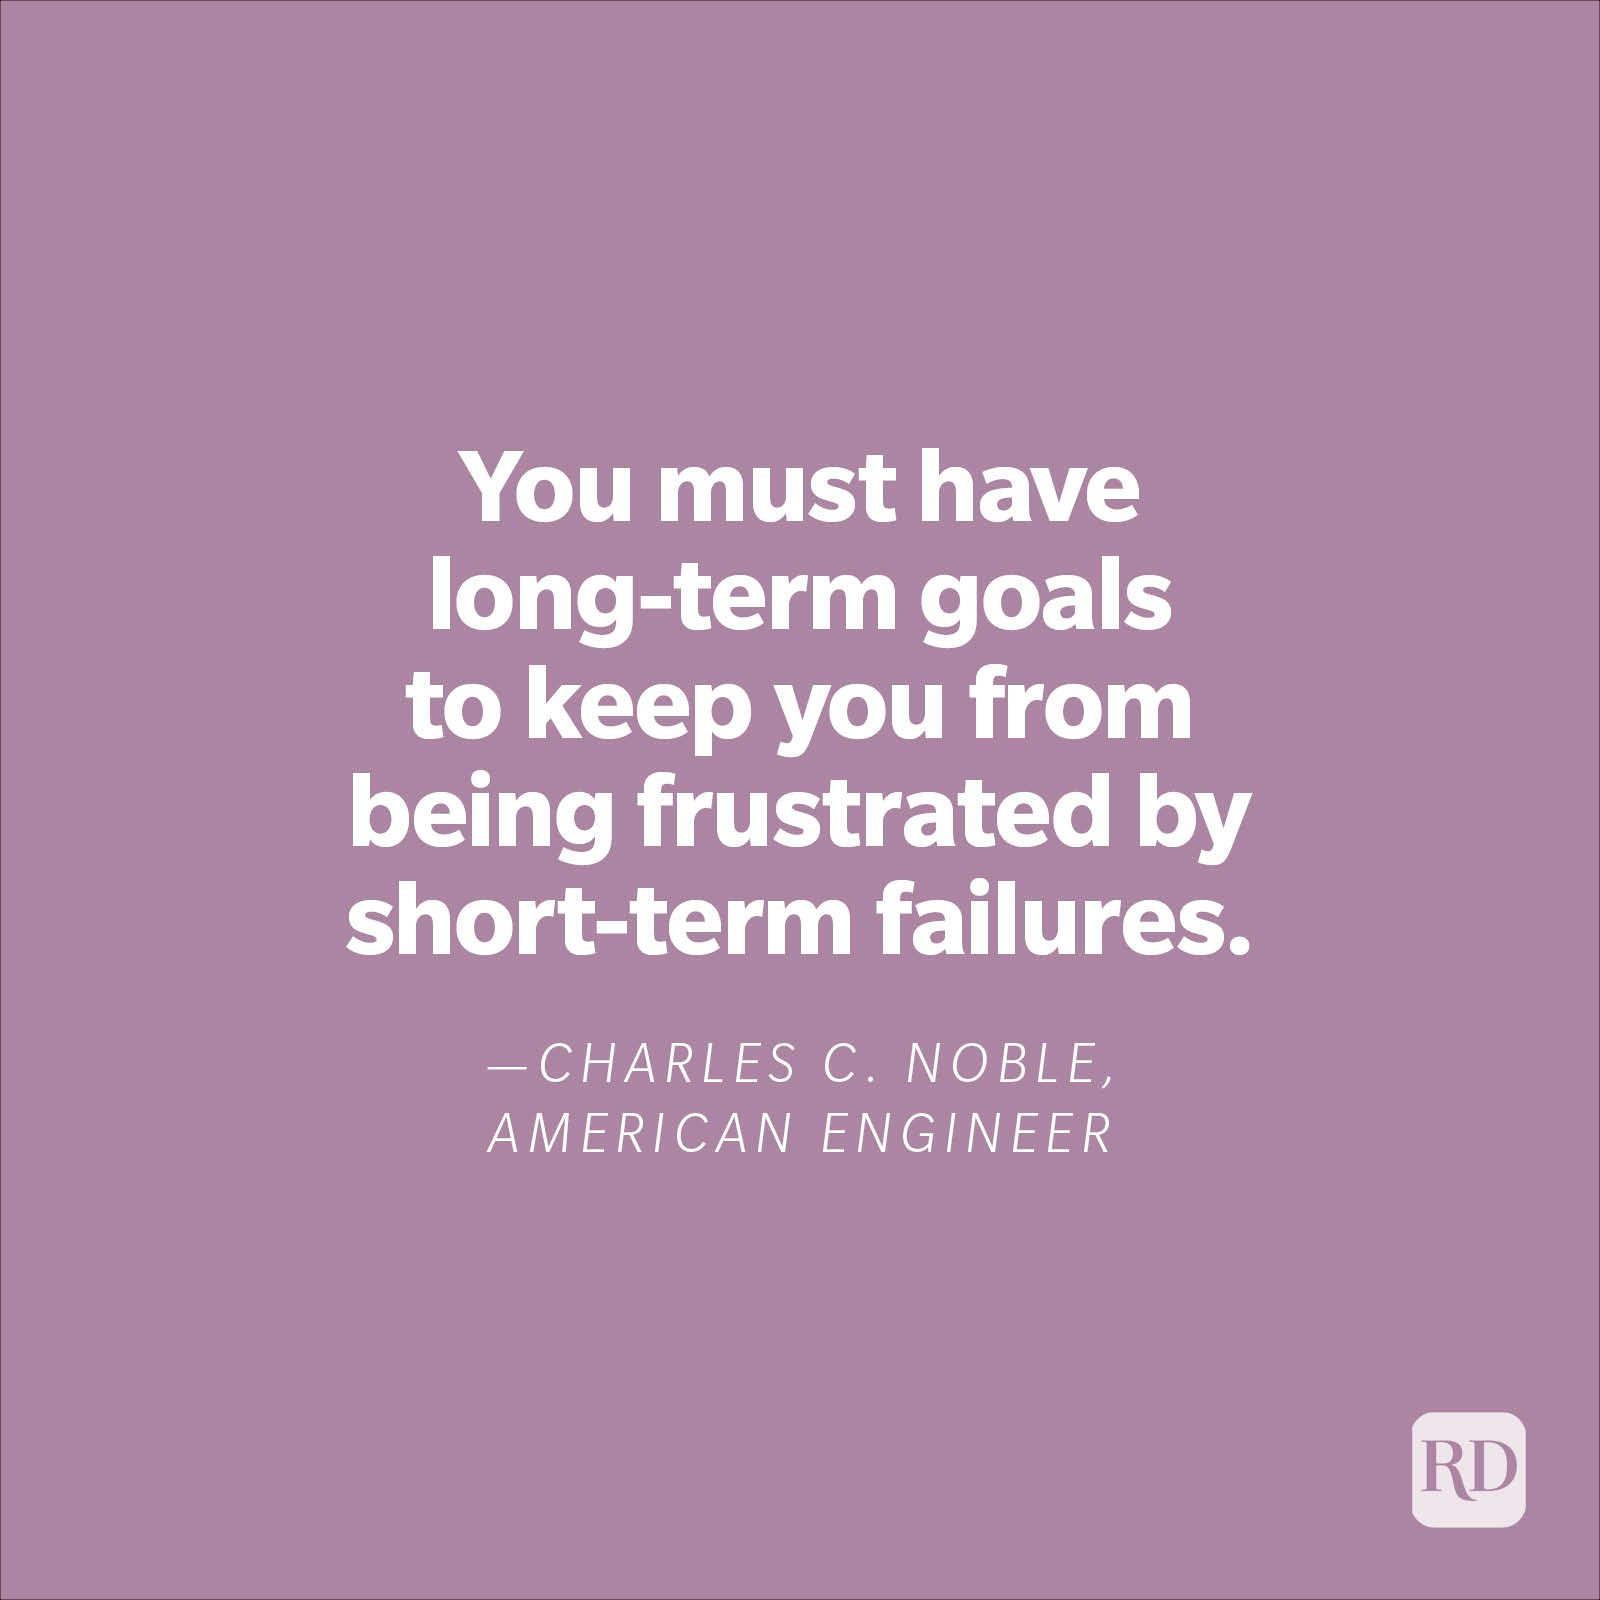 "You must have long-term goals to keep you from being frustrated by short-term failures."—Charles C. Noble, American engineer